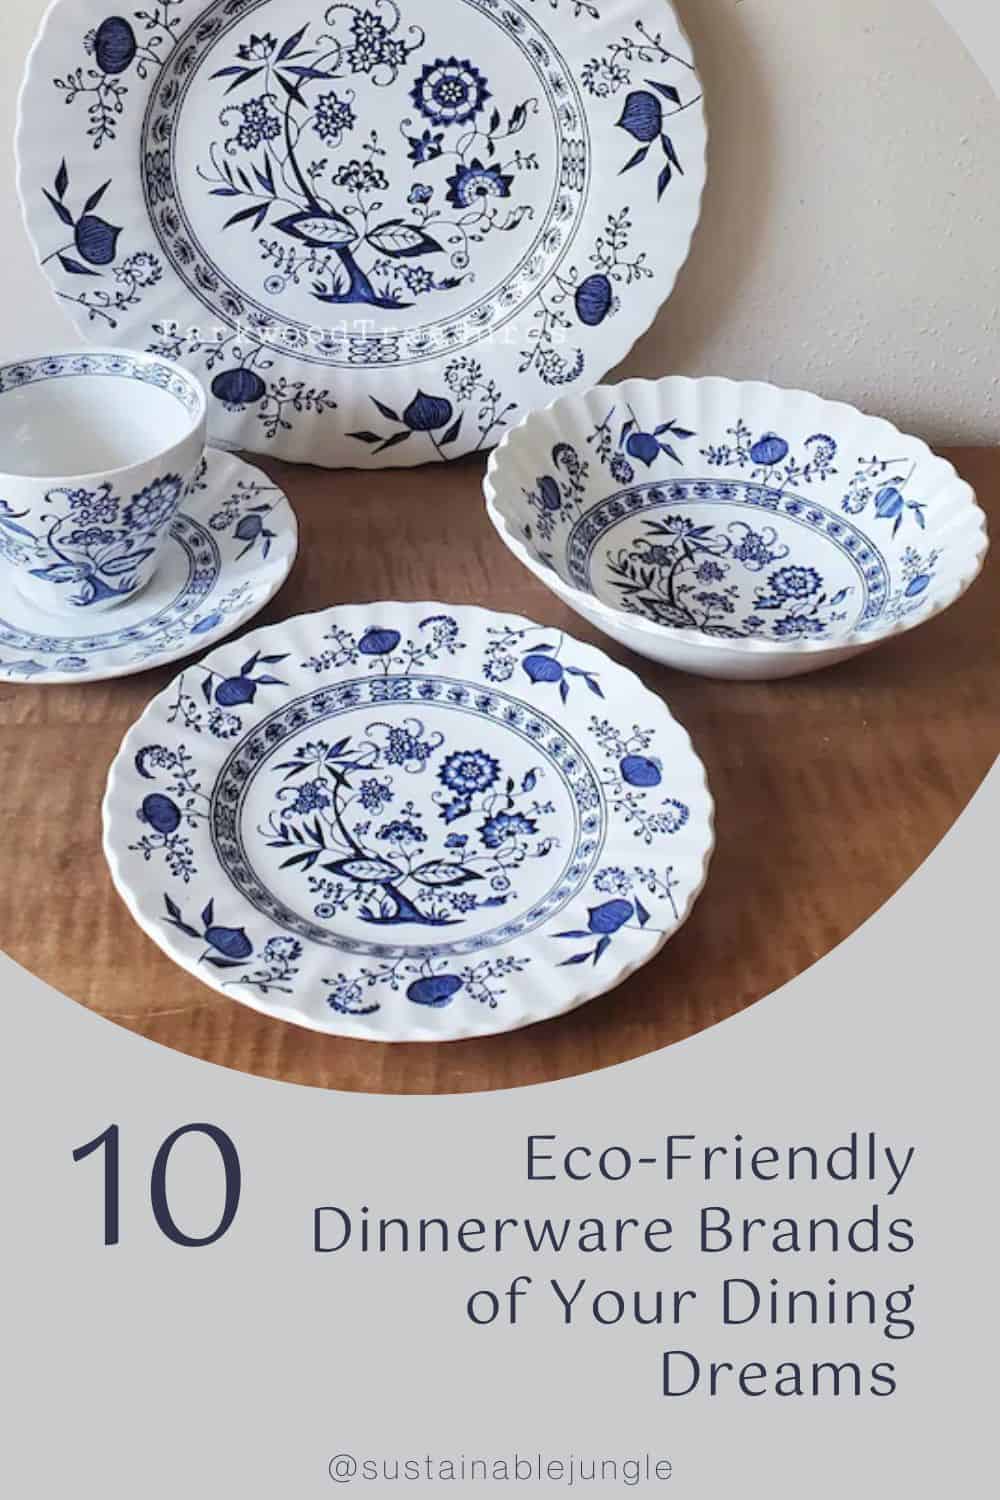 10 Eco-Friendly Dinnerware Brands of Your Dining Dreams Image by Parkwood Treasures #eco-friendlydinnerware #besteco-friendlydinnerware #besteco-friendlydinnerwaresets #sustainabledinnerware #sustainabledinnerwarebrands #sustainablejungle